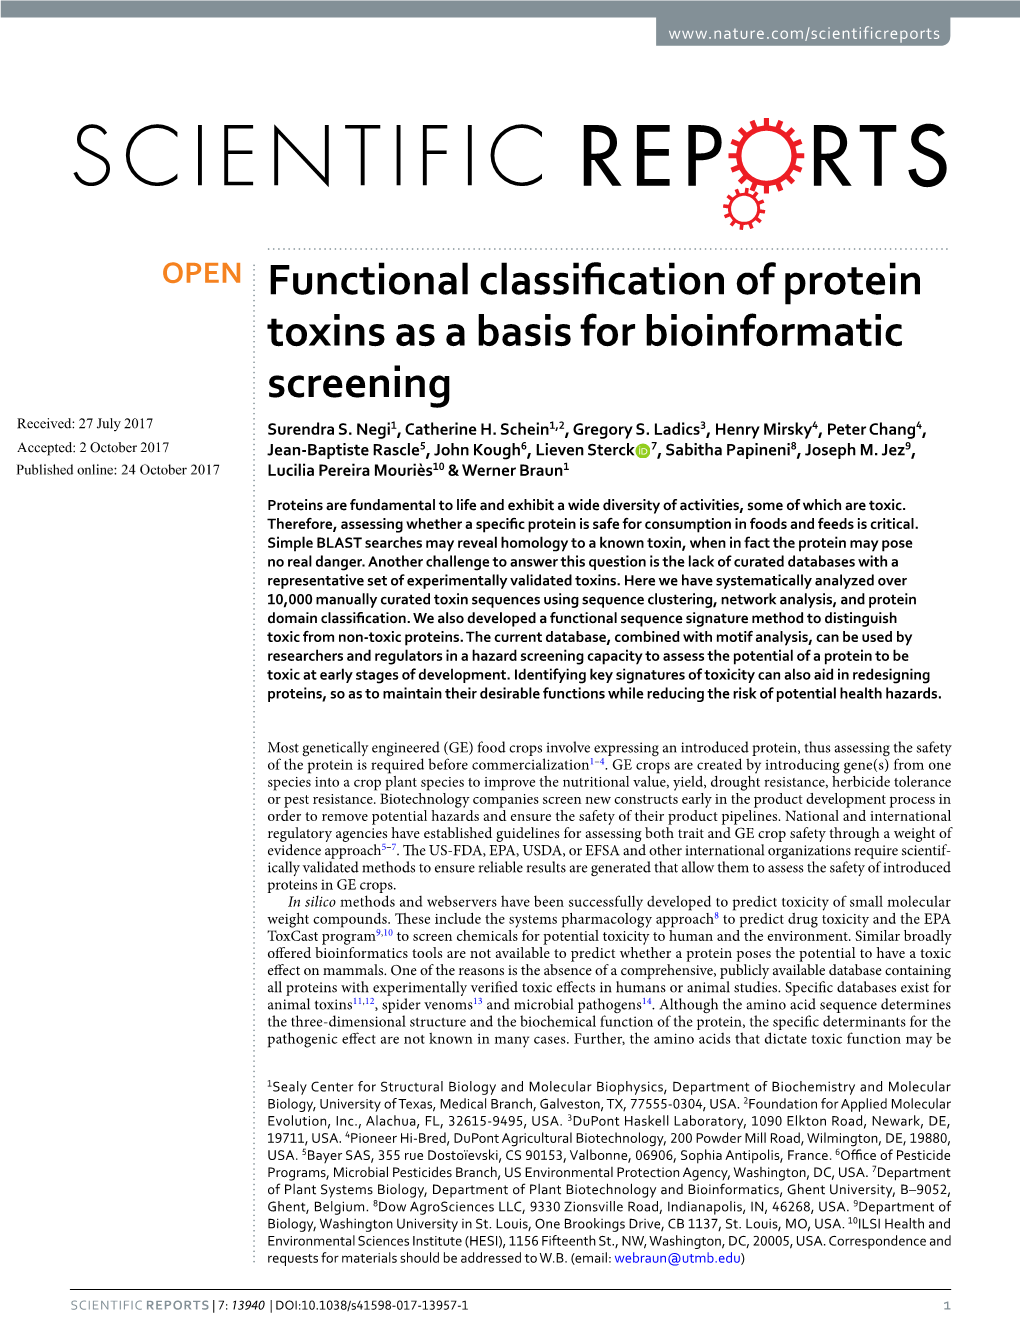 Functional Classification of Protein Toxins As a Basis for Bioinformatic